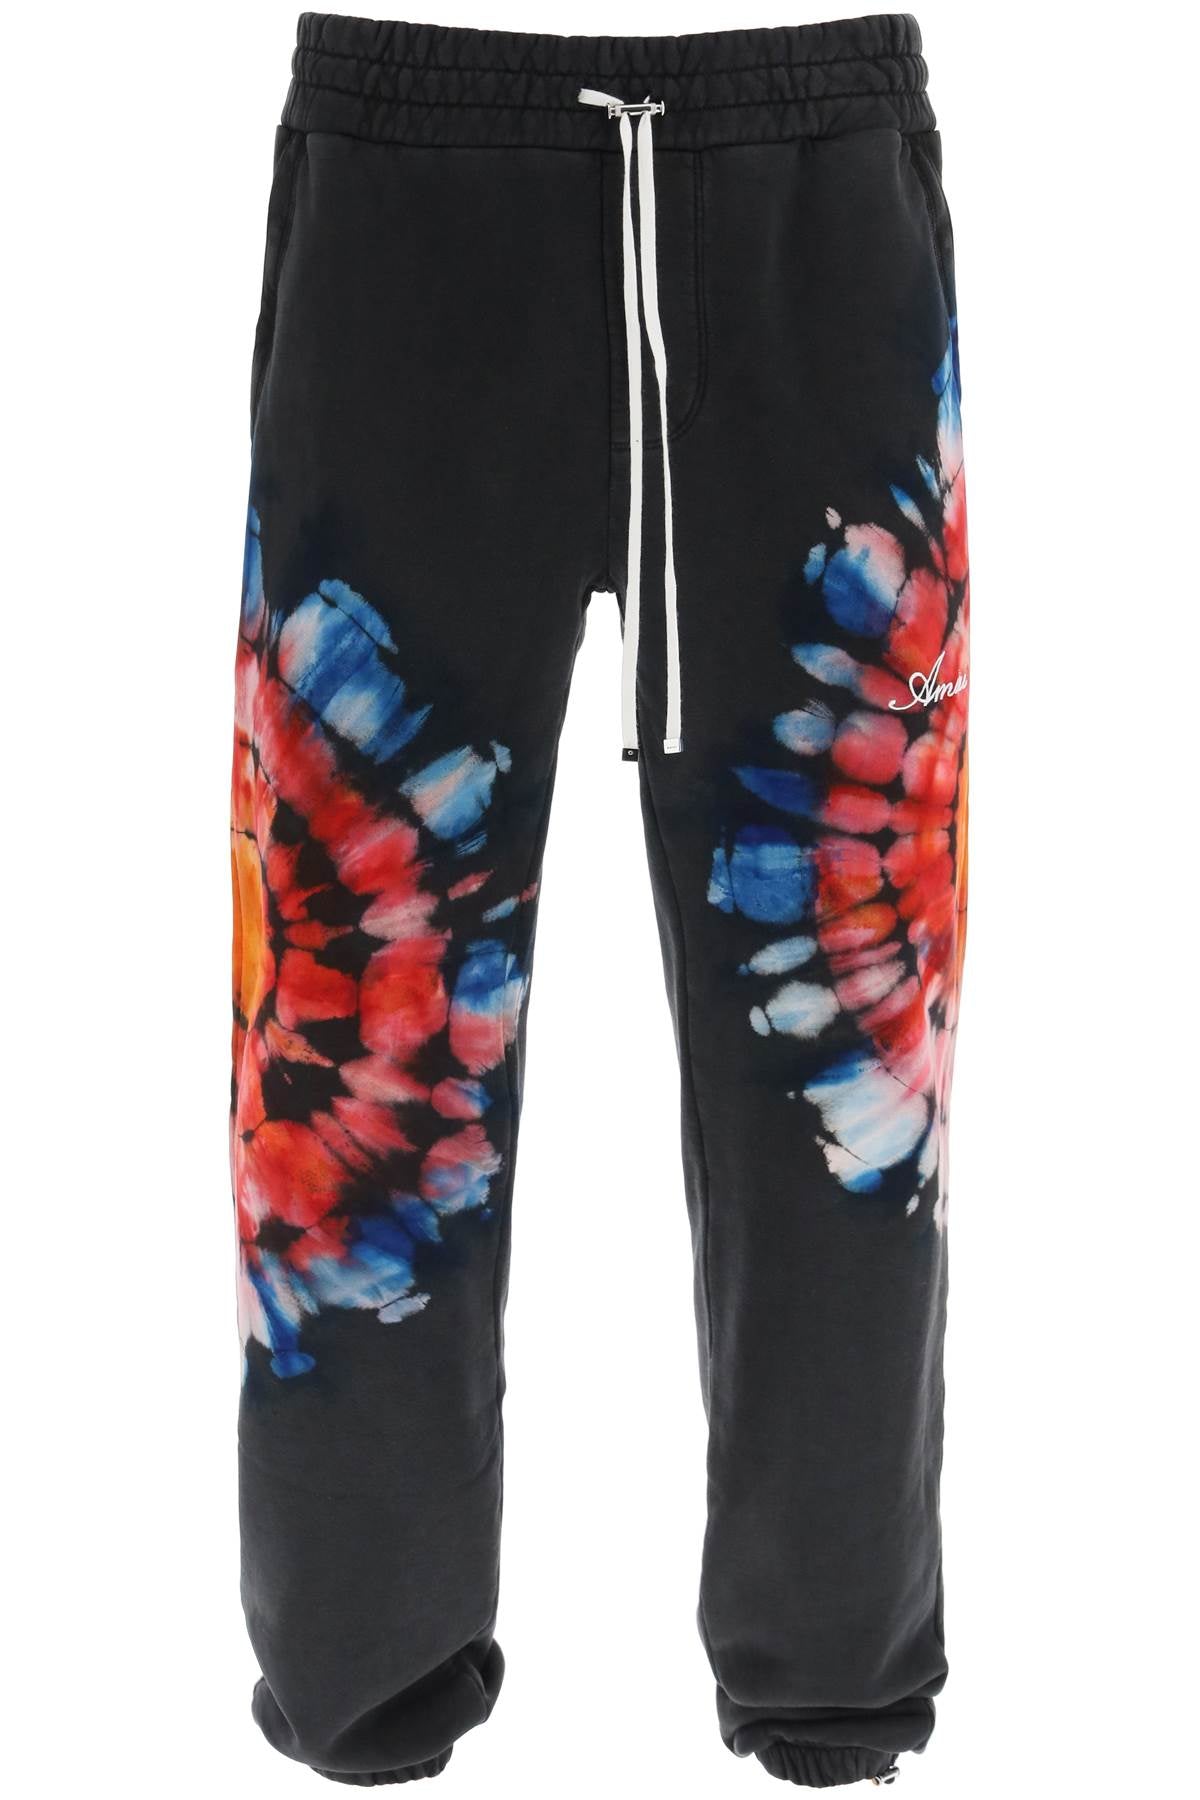 AMIRI Tie-dye Jogger Pants in Mixed Colours for Men